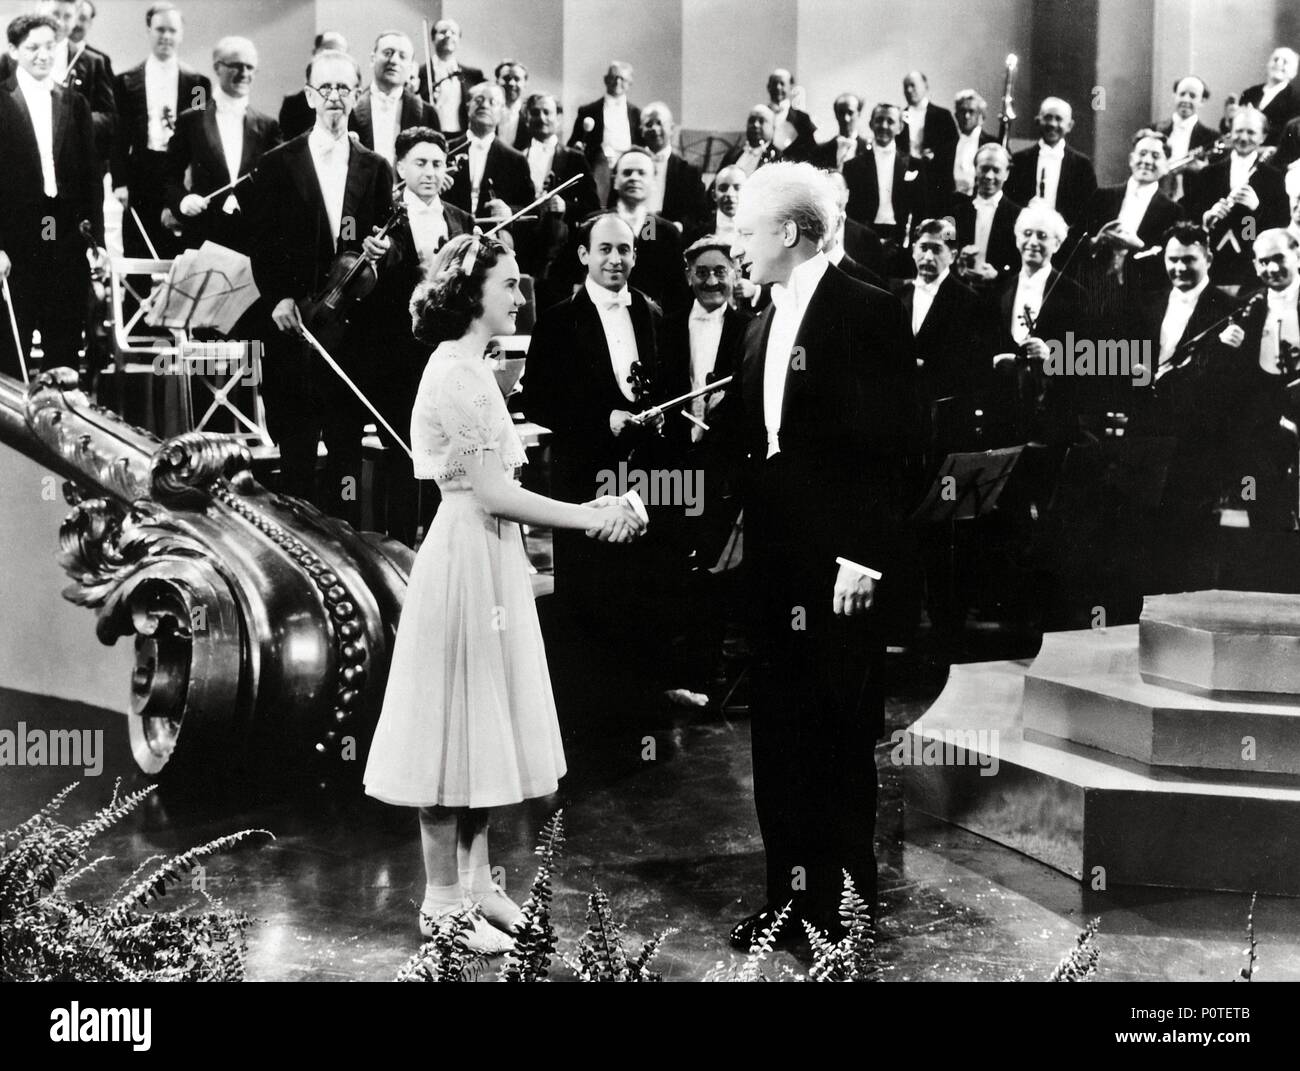 Original Film Title: ONE HUNDRED MEN AND A GIRL.  English Title: ONE HUNDRED MEN AND A GIRL.  Film Director: HENRY KOSTER.  Year: 1937.  Stars: LEOPOLD STOKOWSKI; DEANNA DURBIN. Credit: UNIVERSAL PICTURES / Album Stock Photo